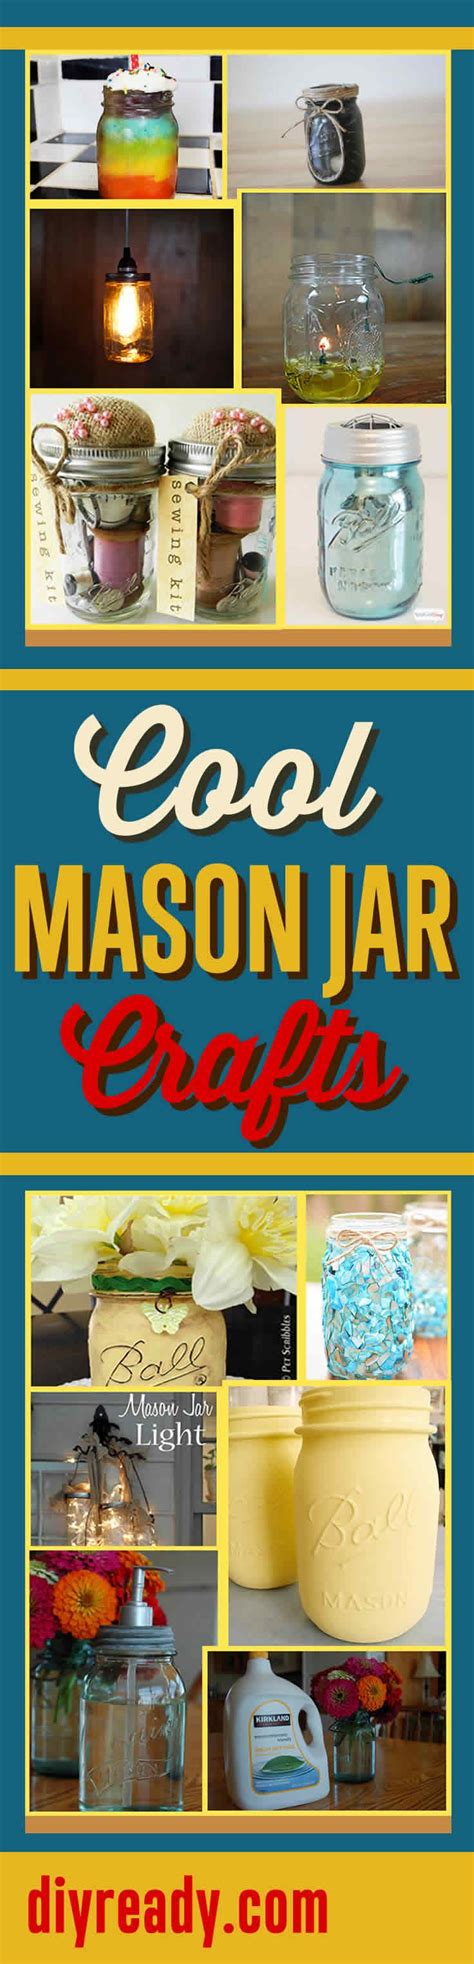 32 Cool Mason Jar Crafts You Can Do At Home 2nd Edition Diy